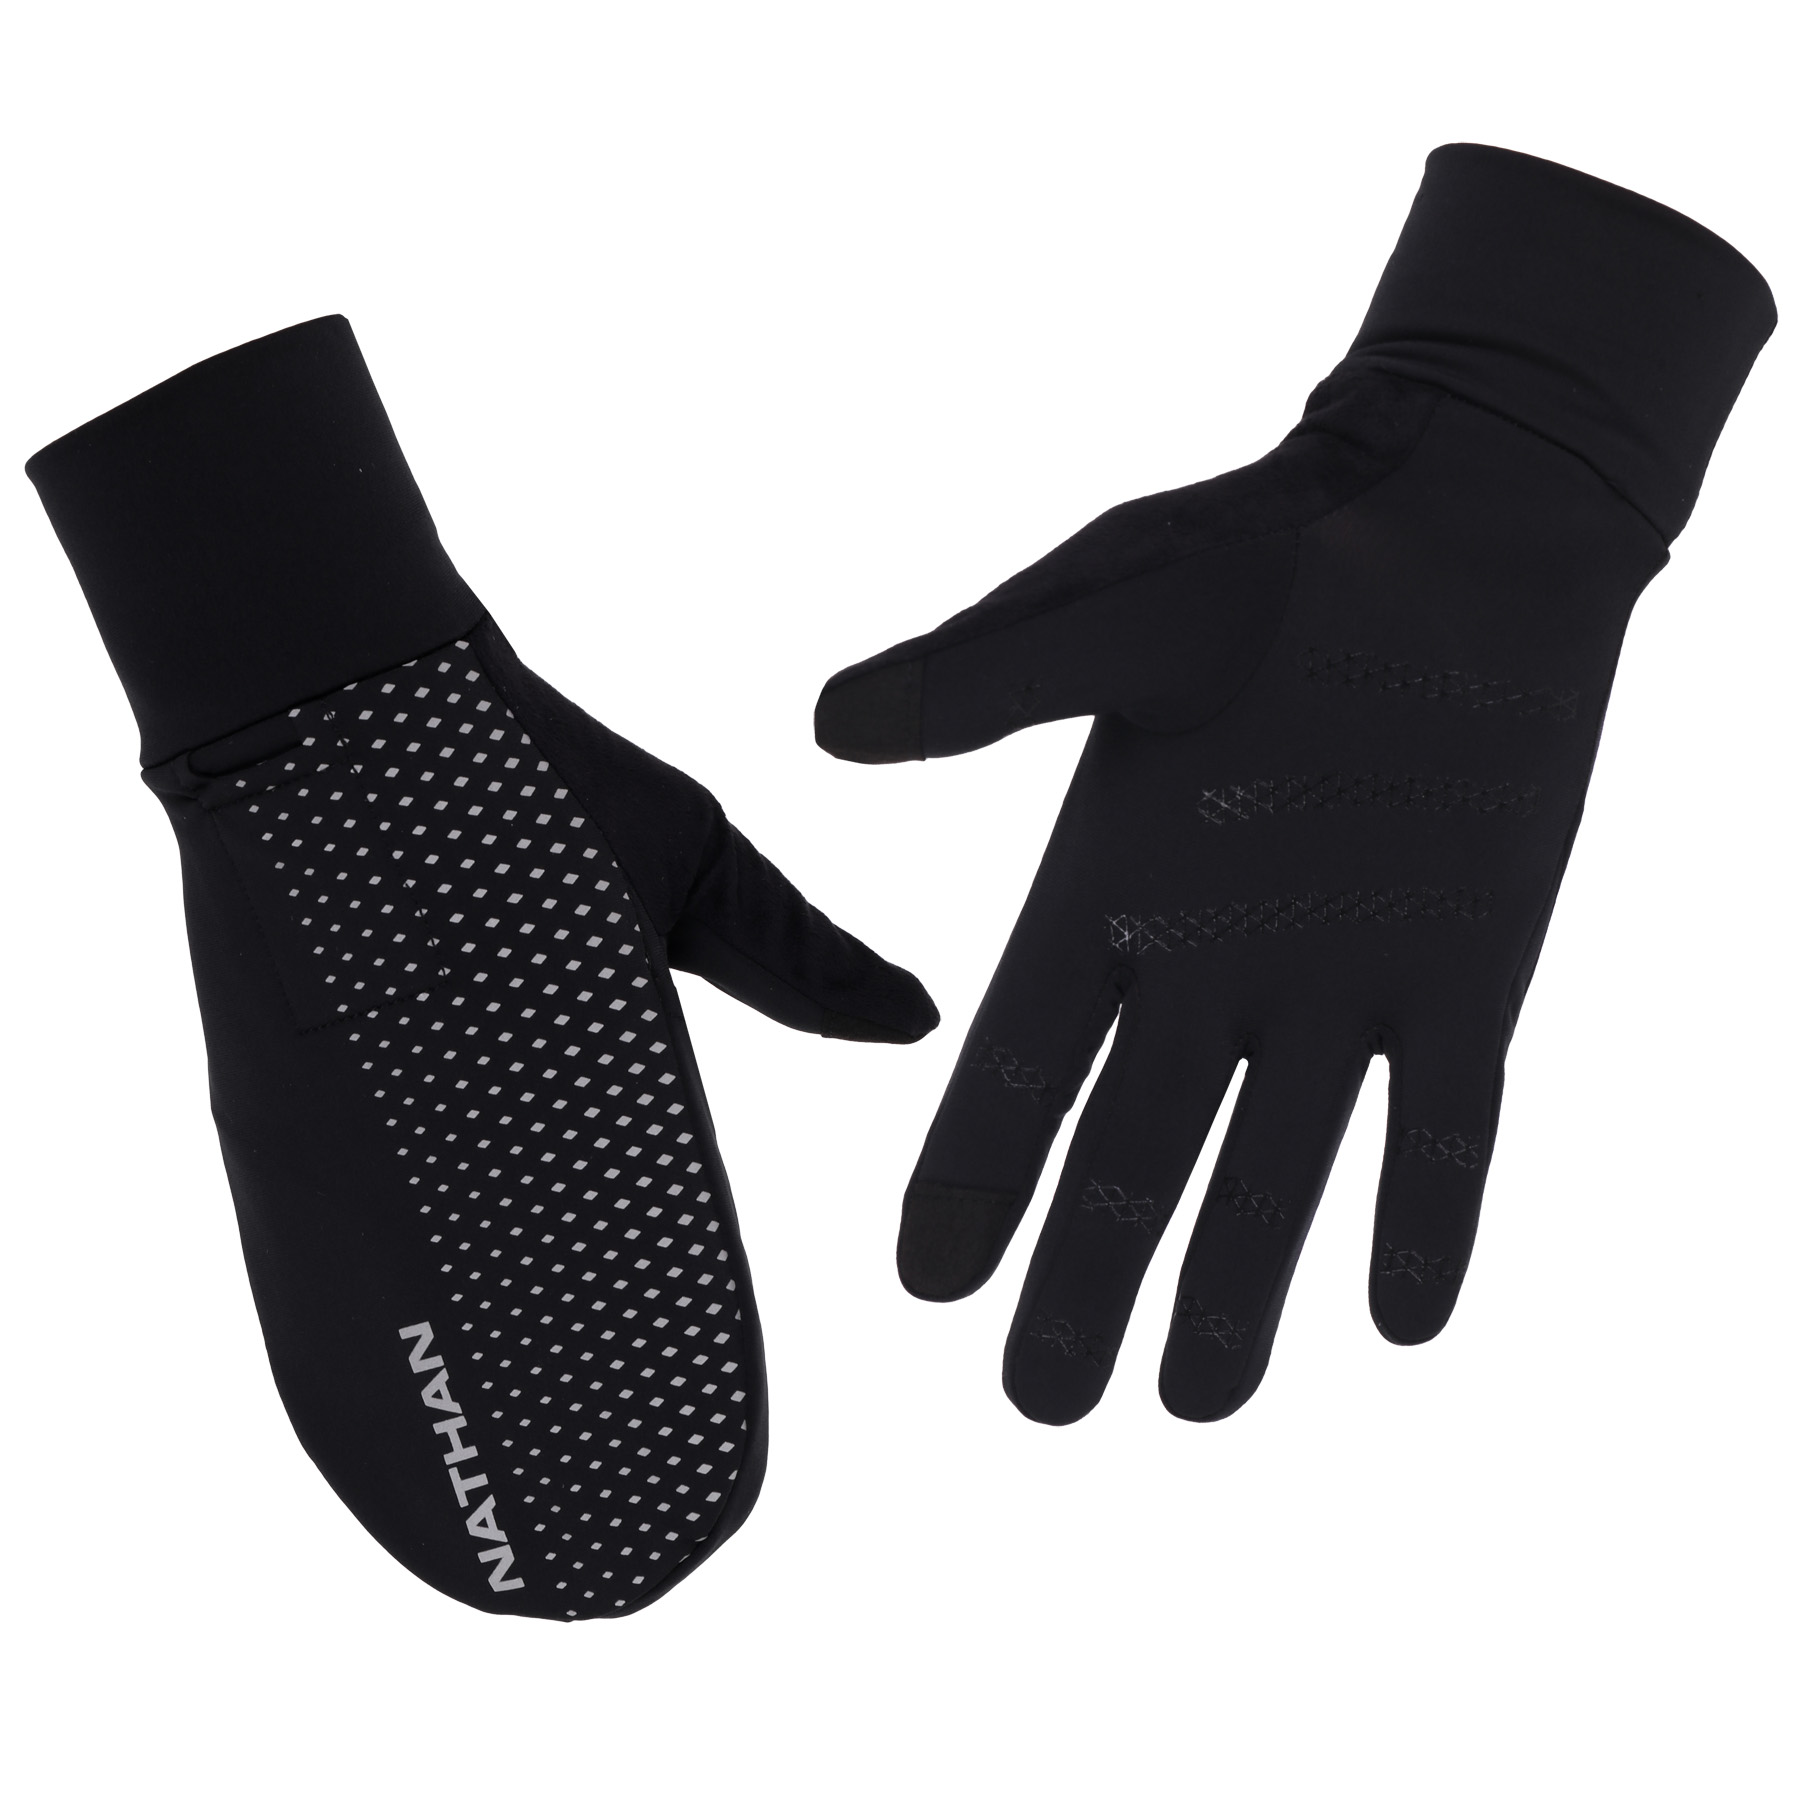 Picture of Nathan Sports Hypernight Convertible Mitts - Black/Geo Print